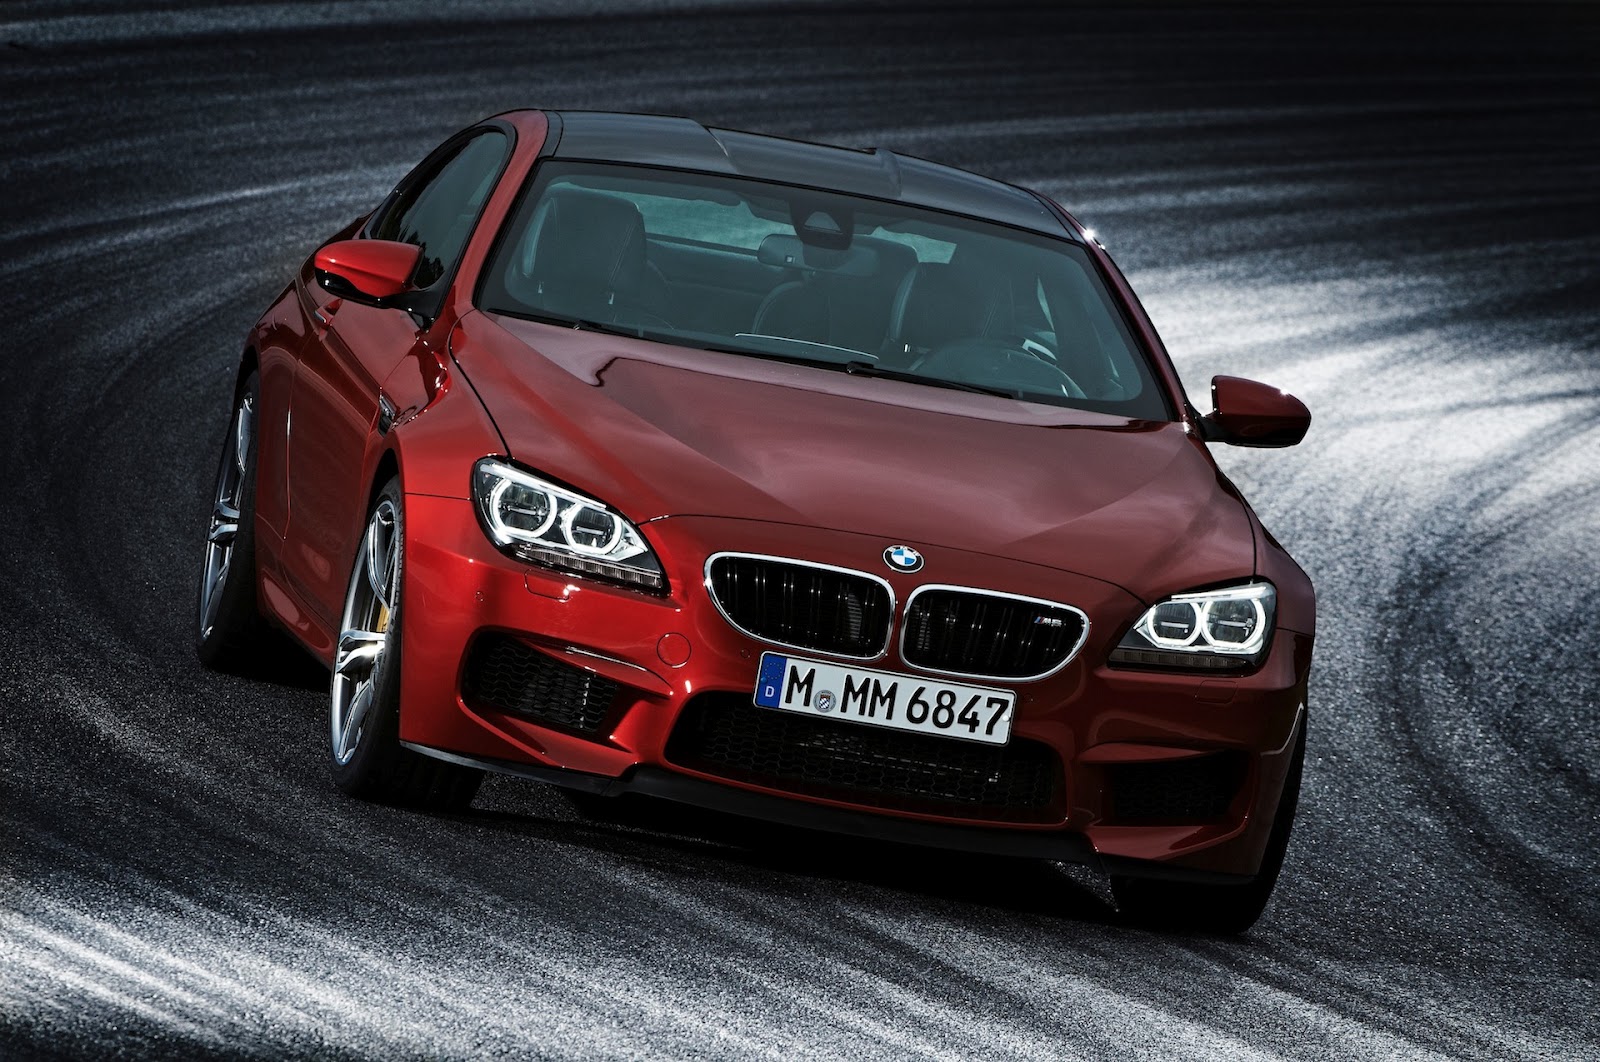 Gallery of 120+ HD BMW M6 Wallpapers. - BMW Lovers